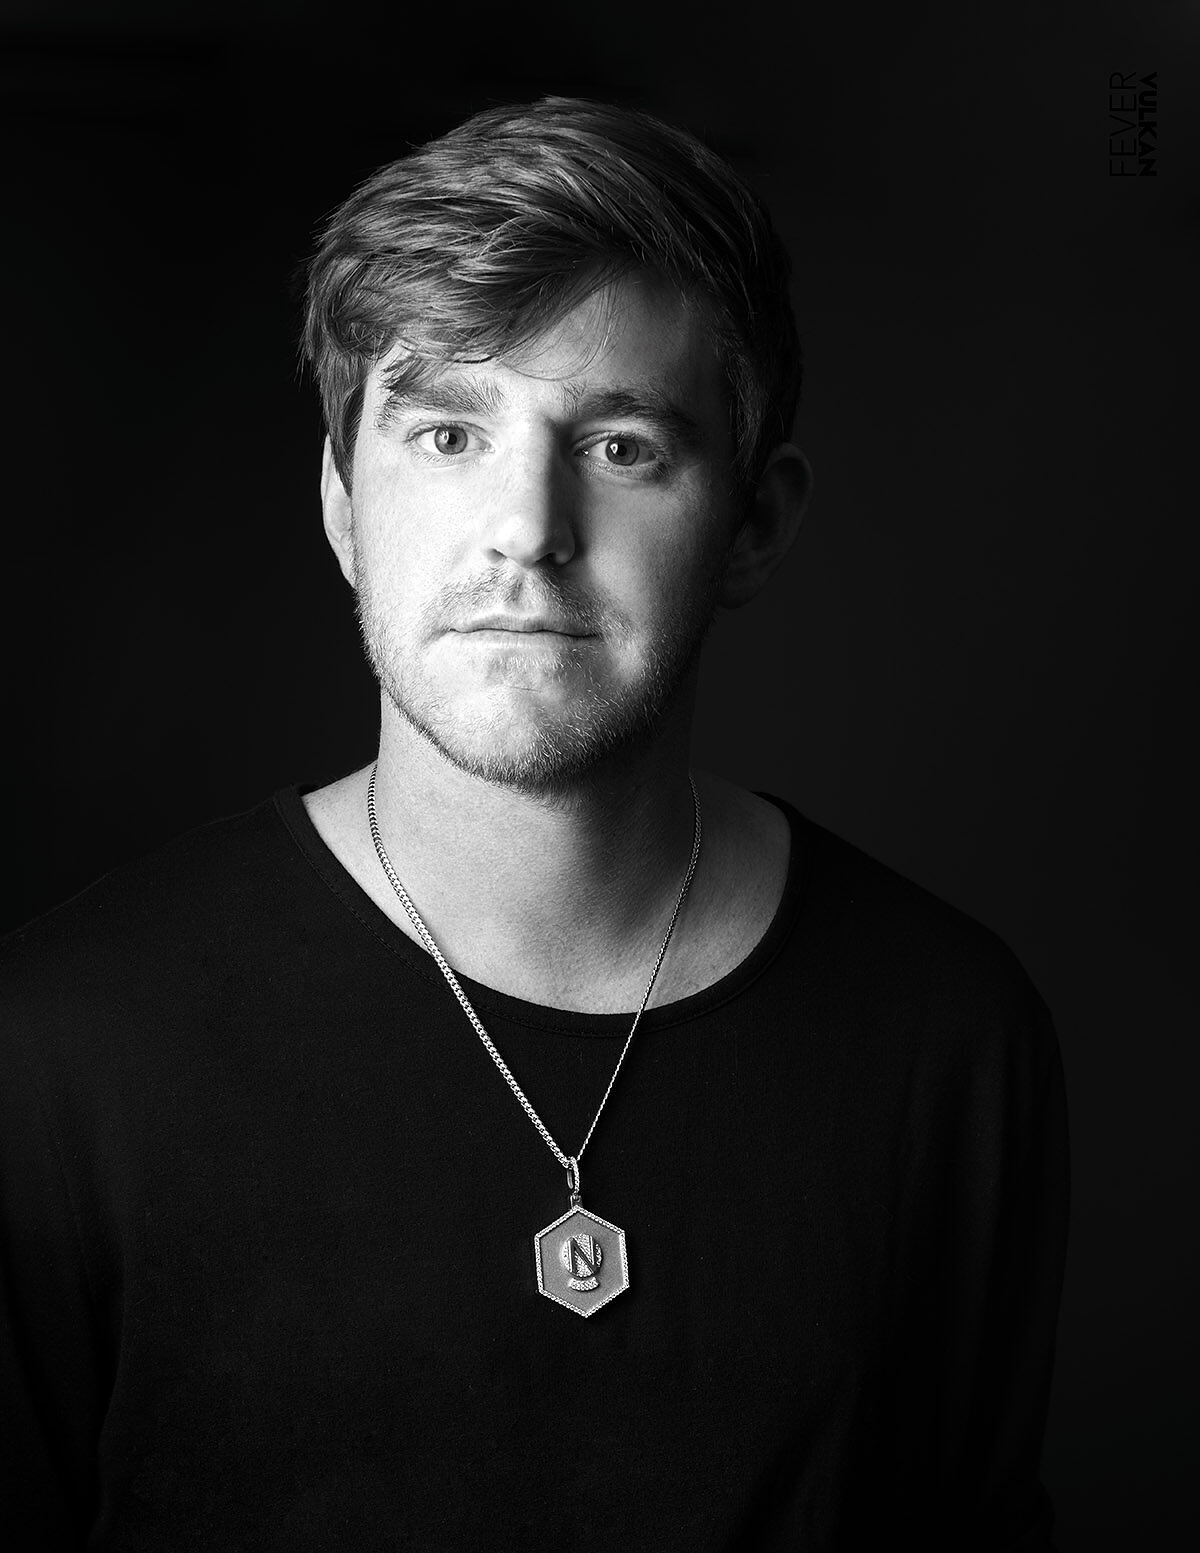 NGHTMRE3